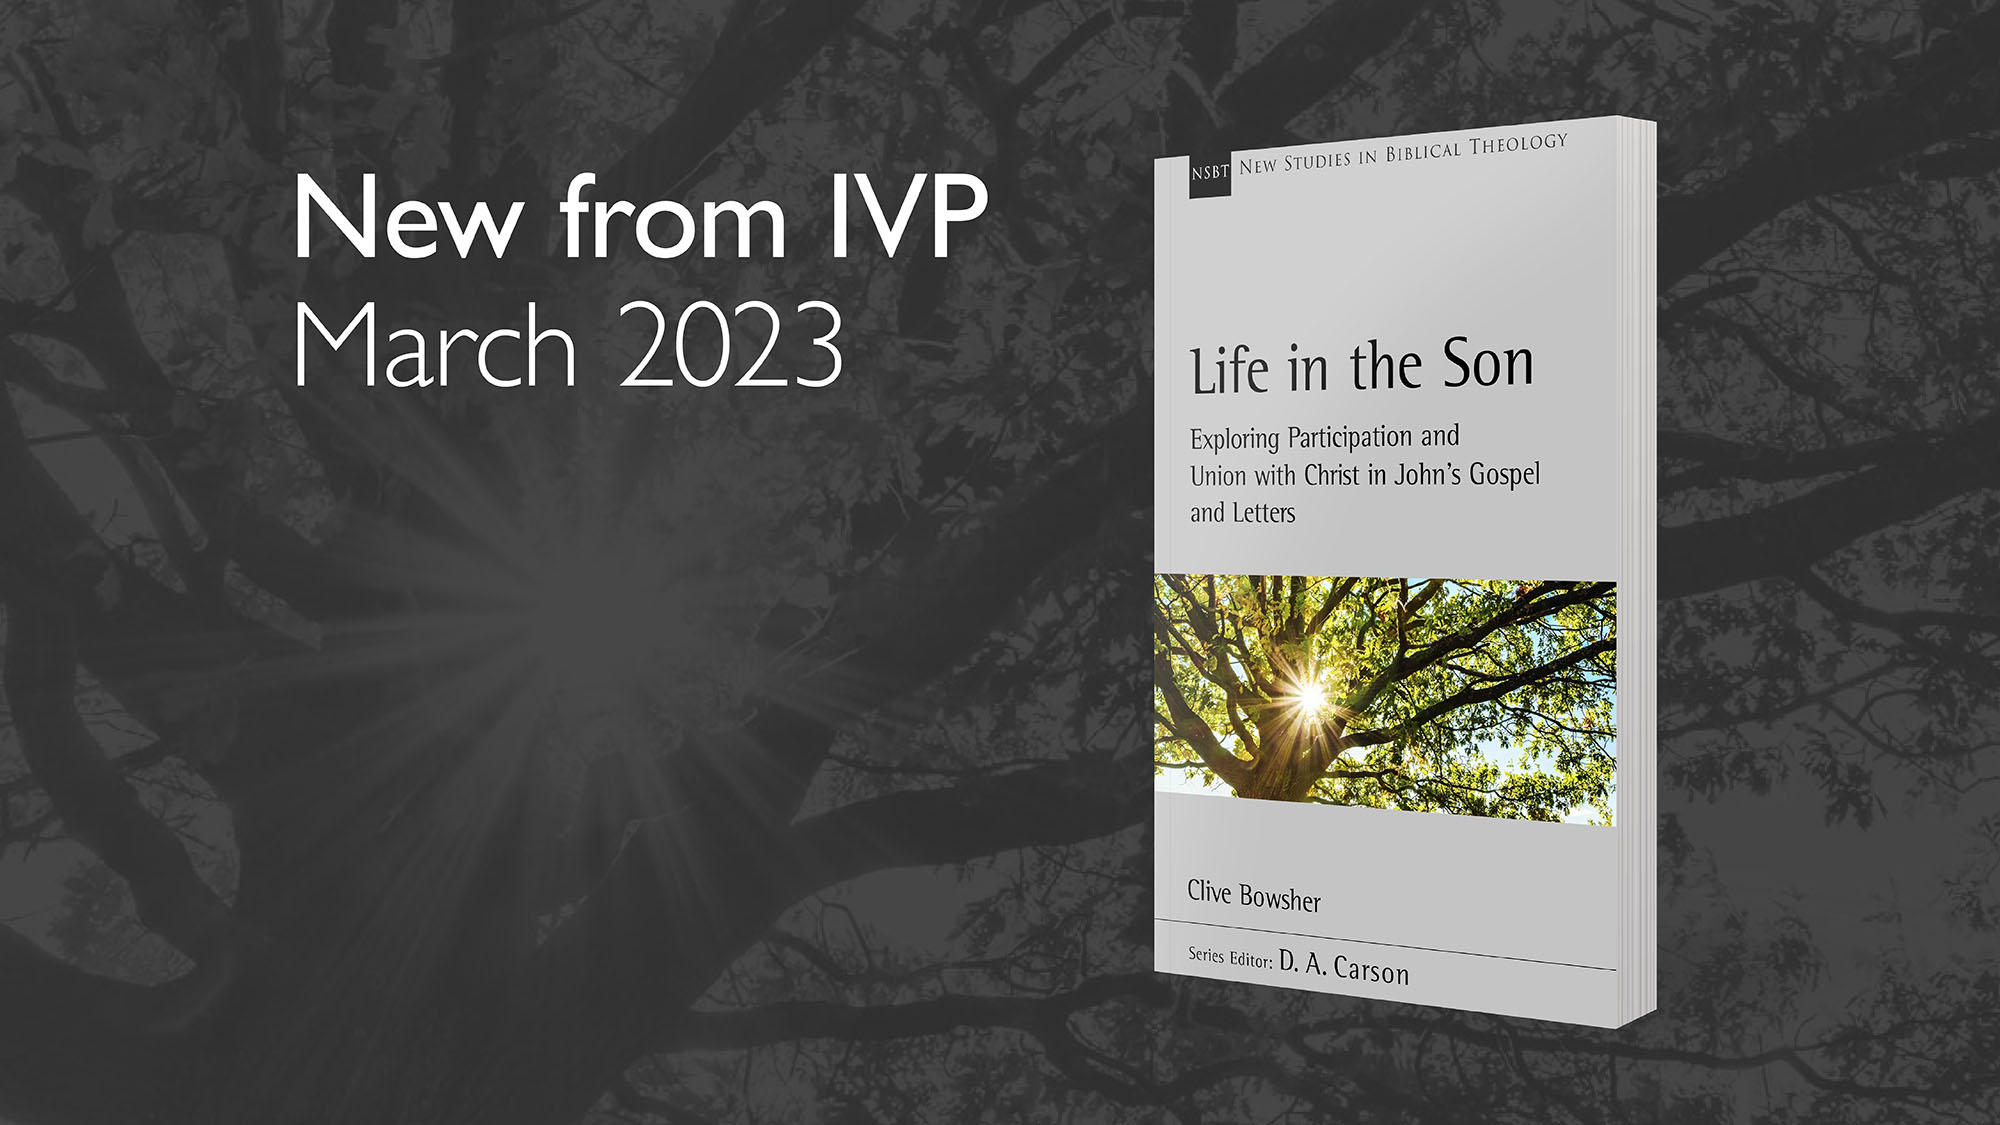 The IVP March 2023 Release